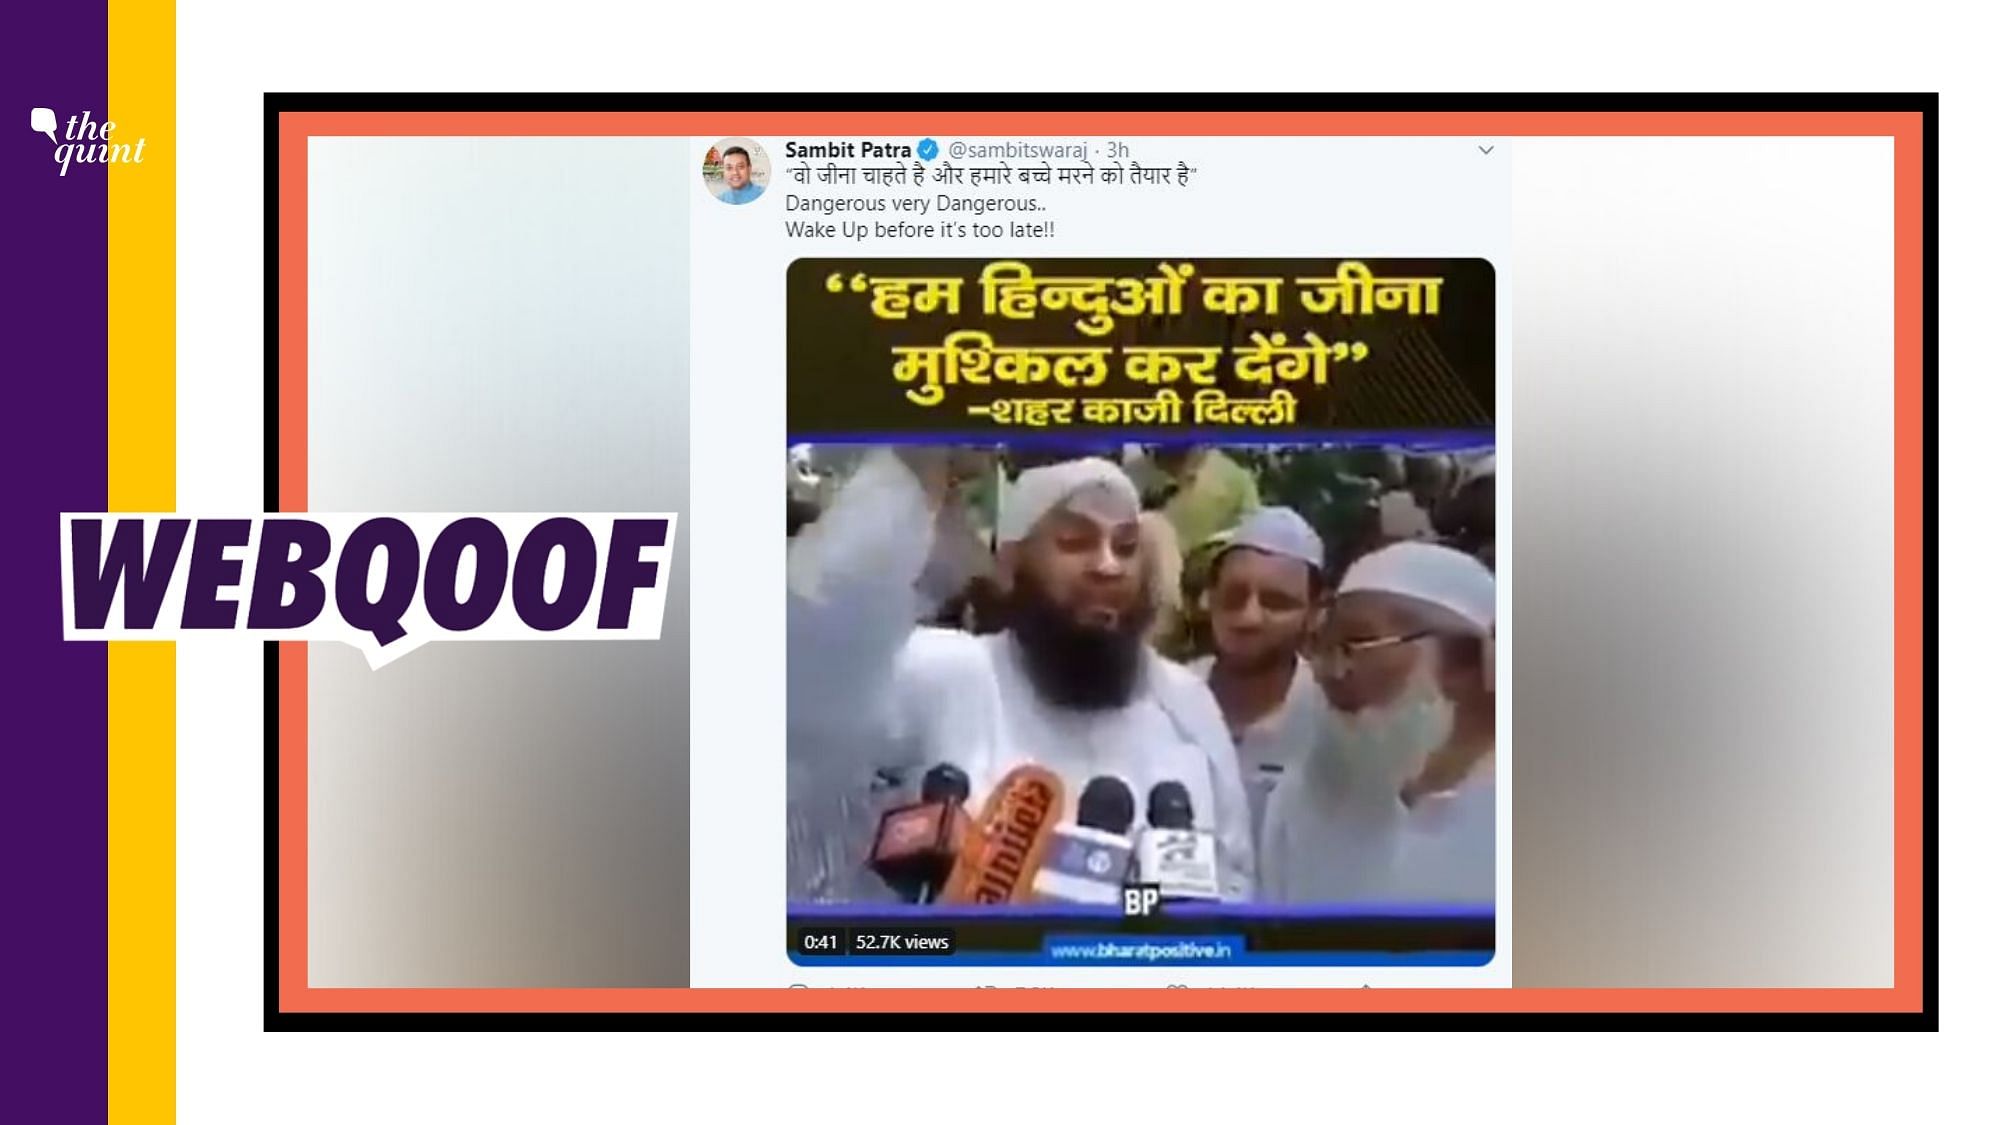 BJP Spokesperson Sambit Patra also shared the video with a line from the cleric’s statement which reads, “वो जीना चाहते है और हमारे बच्चे मरने को तैयार है”. [Translation: They want to live and our children are ready to kill.]